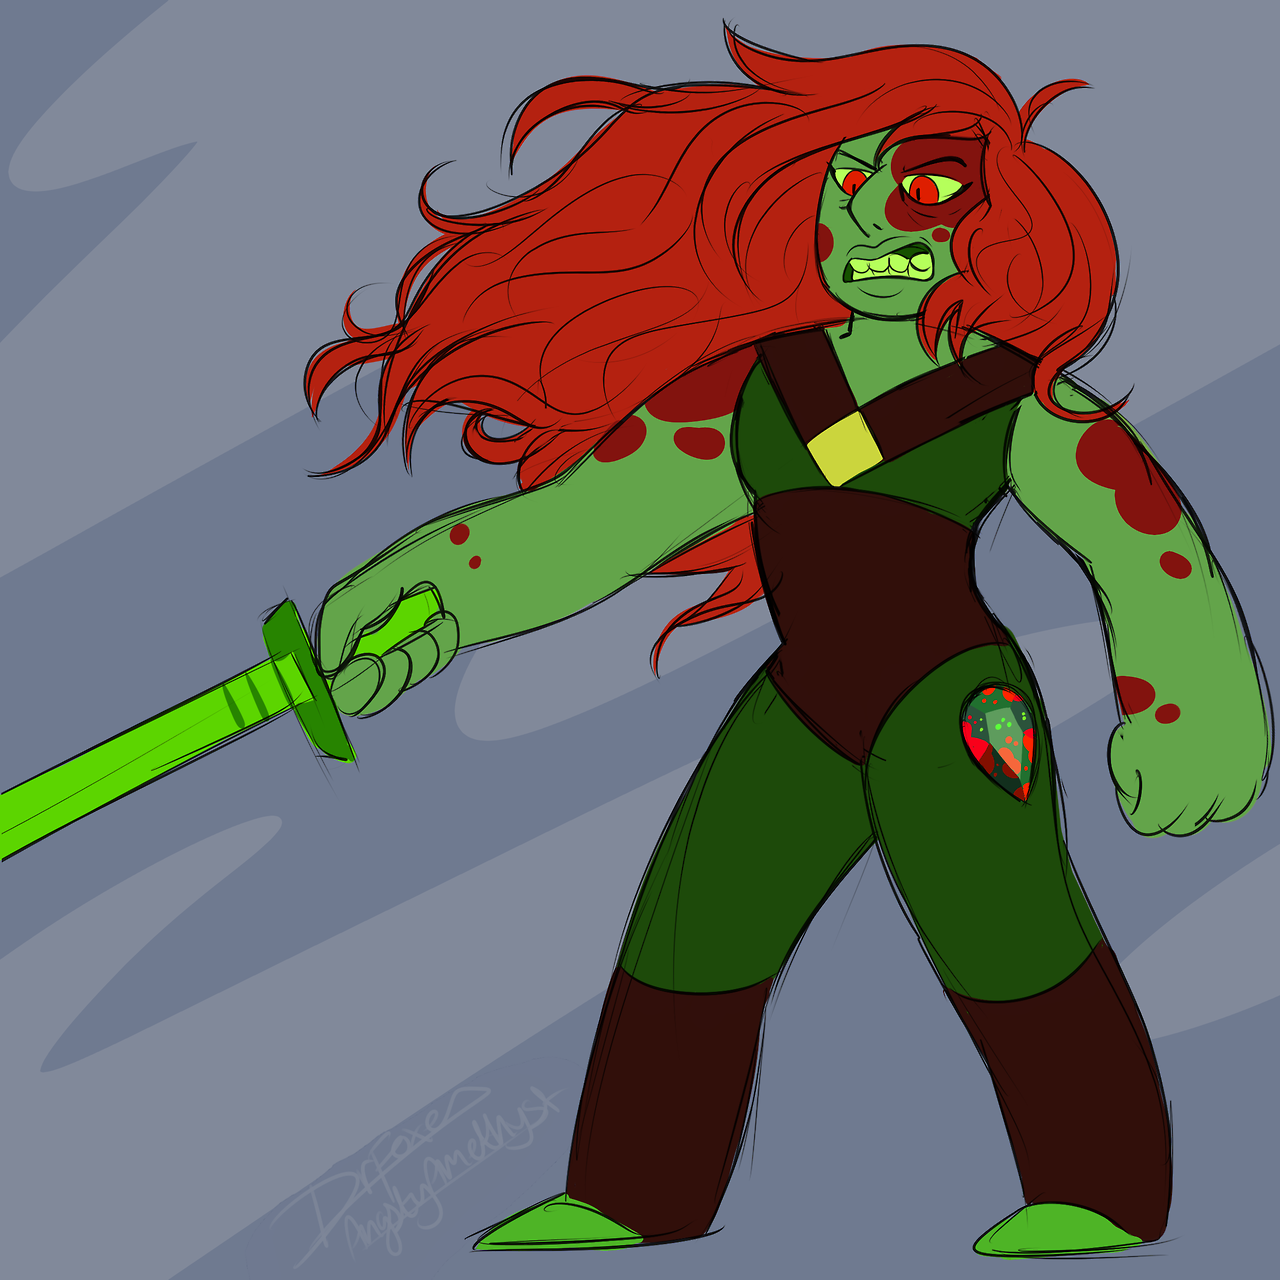 I know it’s probably not the best idea to introduce a new character into the show right now, but the CN troll got me thinking about what a real Bloodstone would have been like